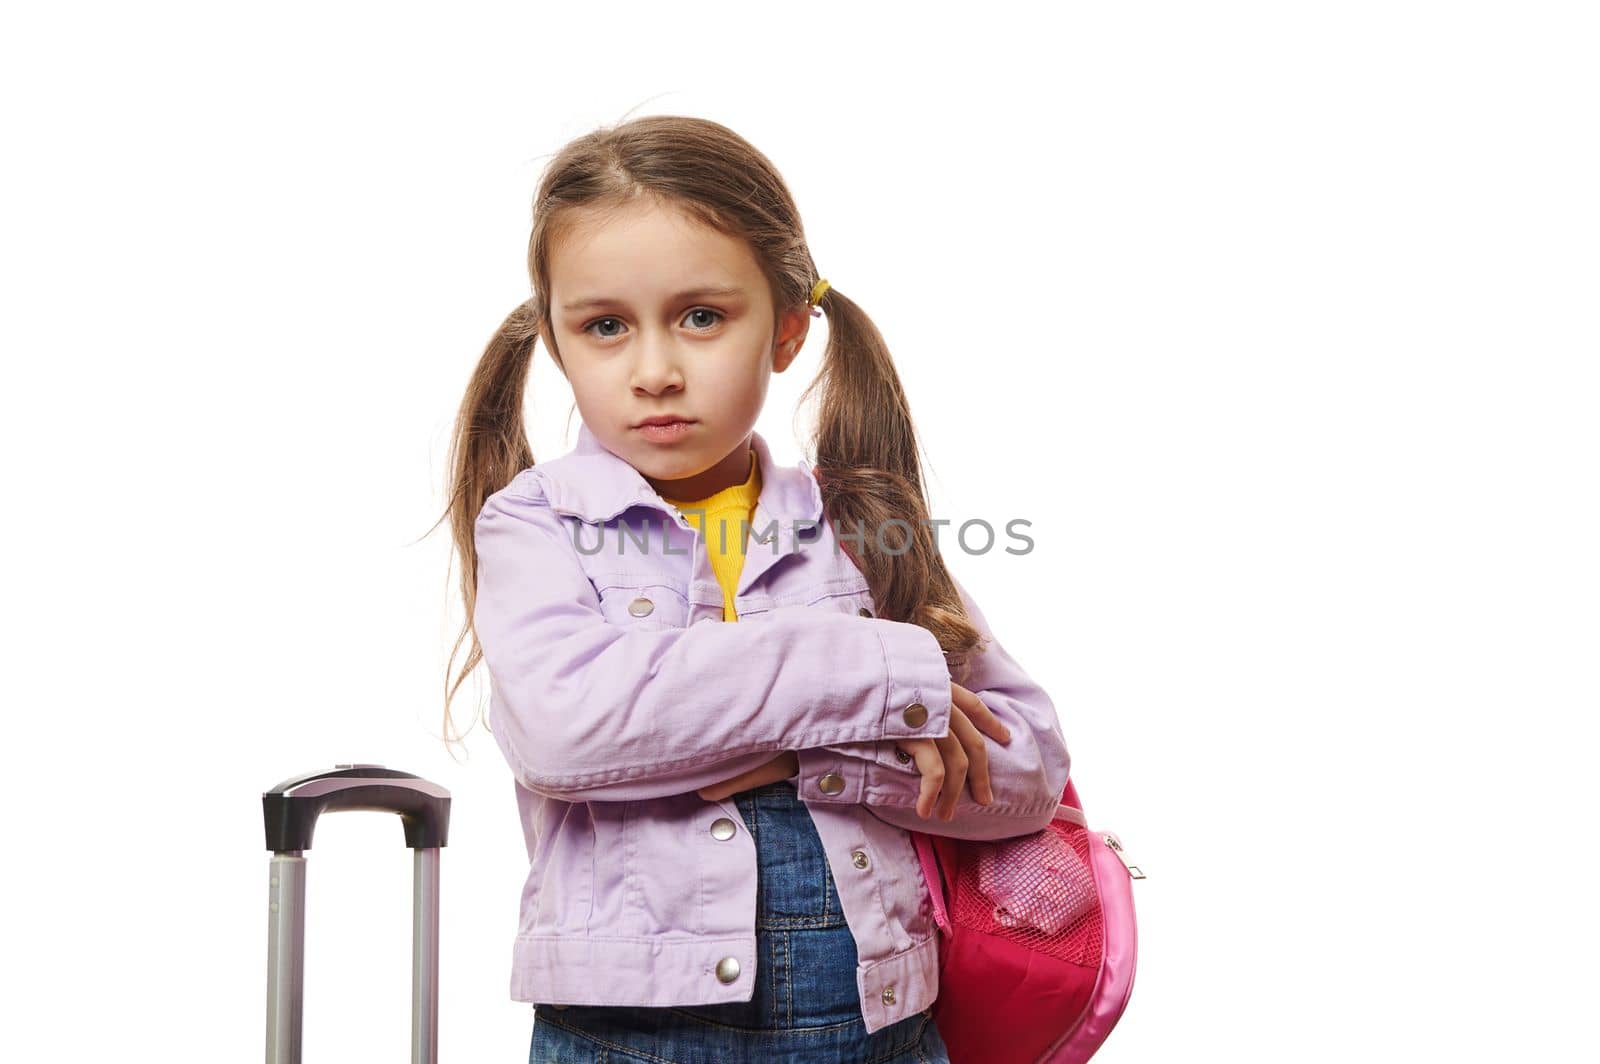 Pretty baby girl , preschooler child with two ponytails, posing with backpack and suitcase over white background. Travel by artgf